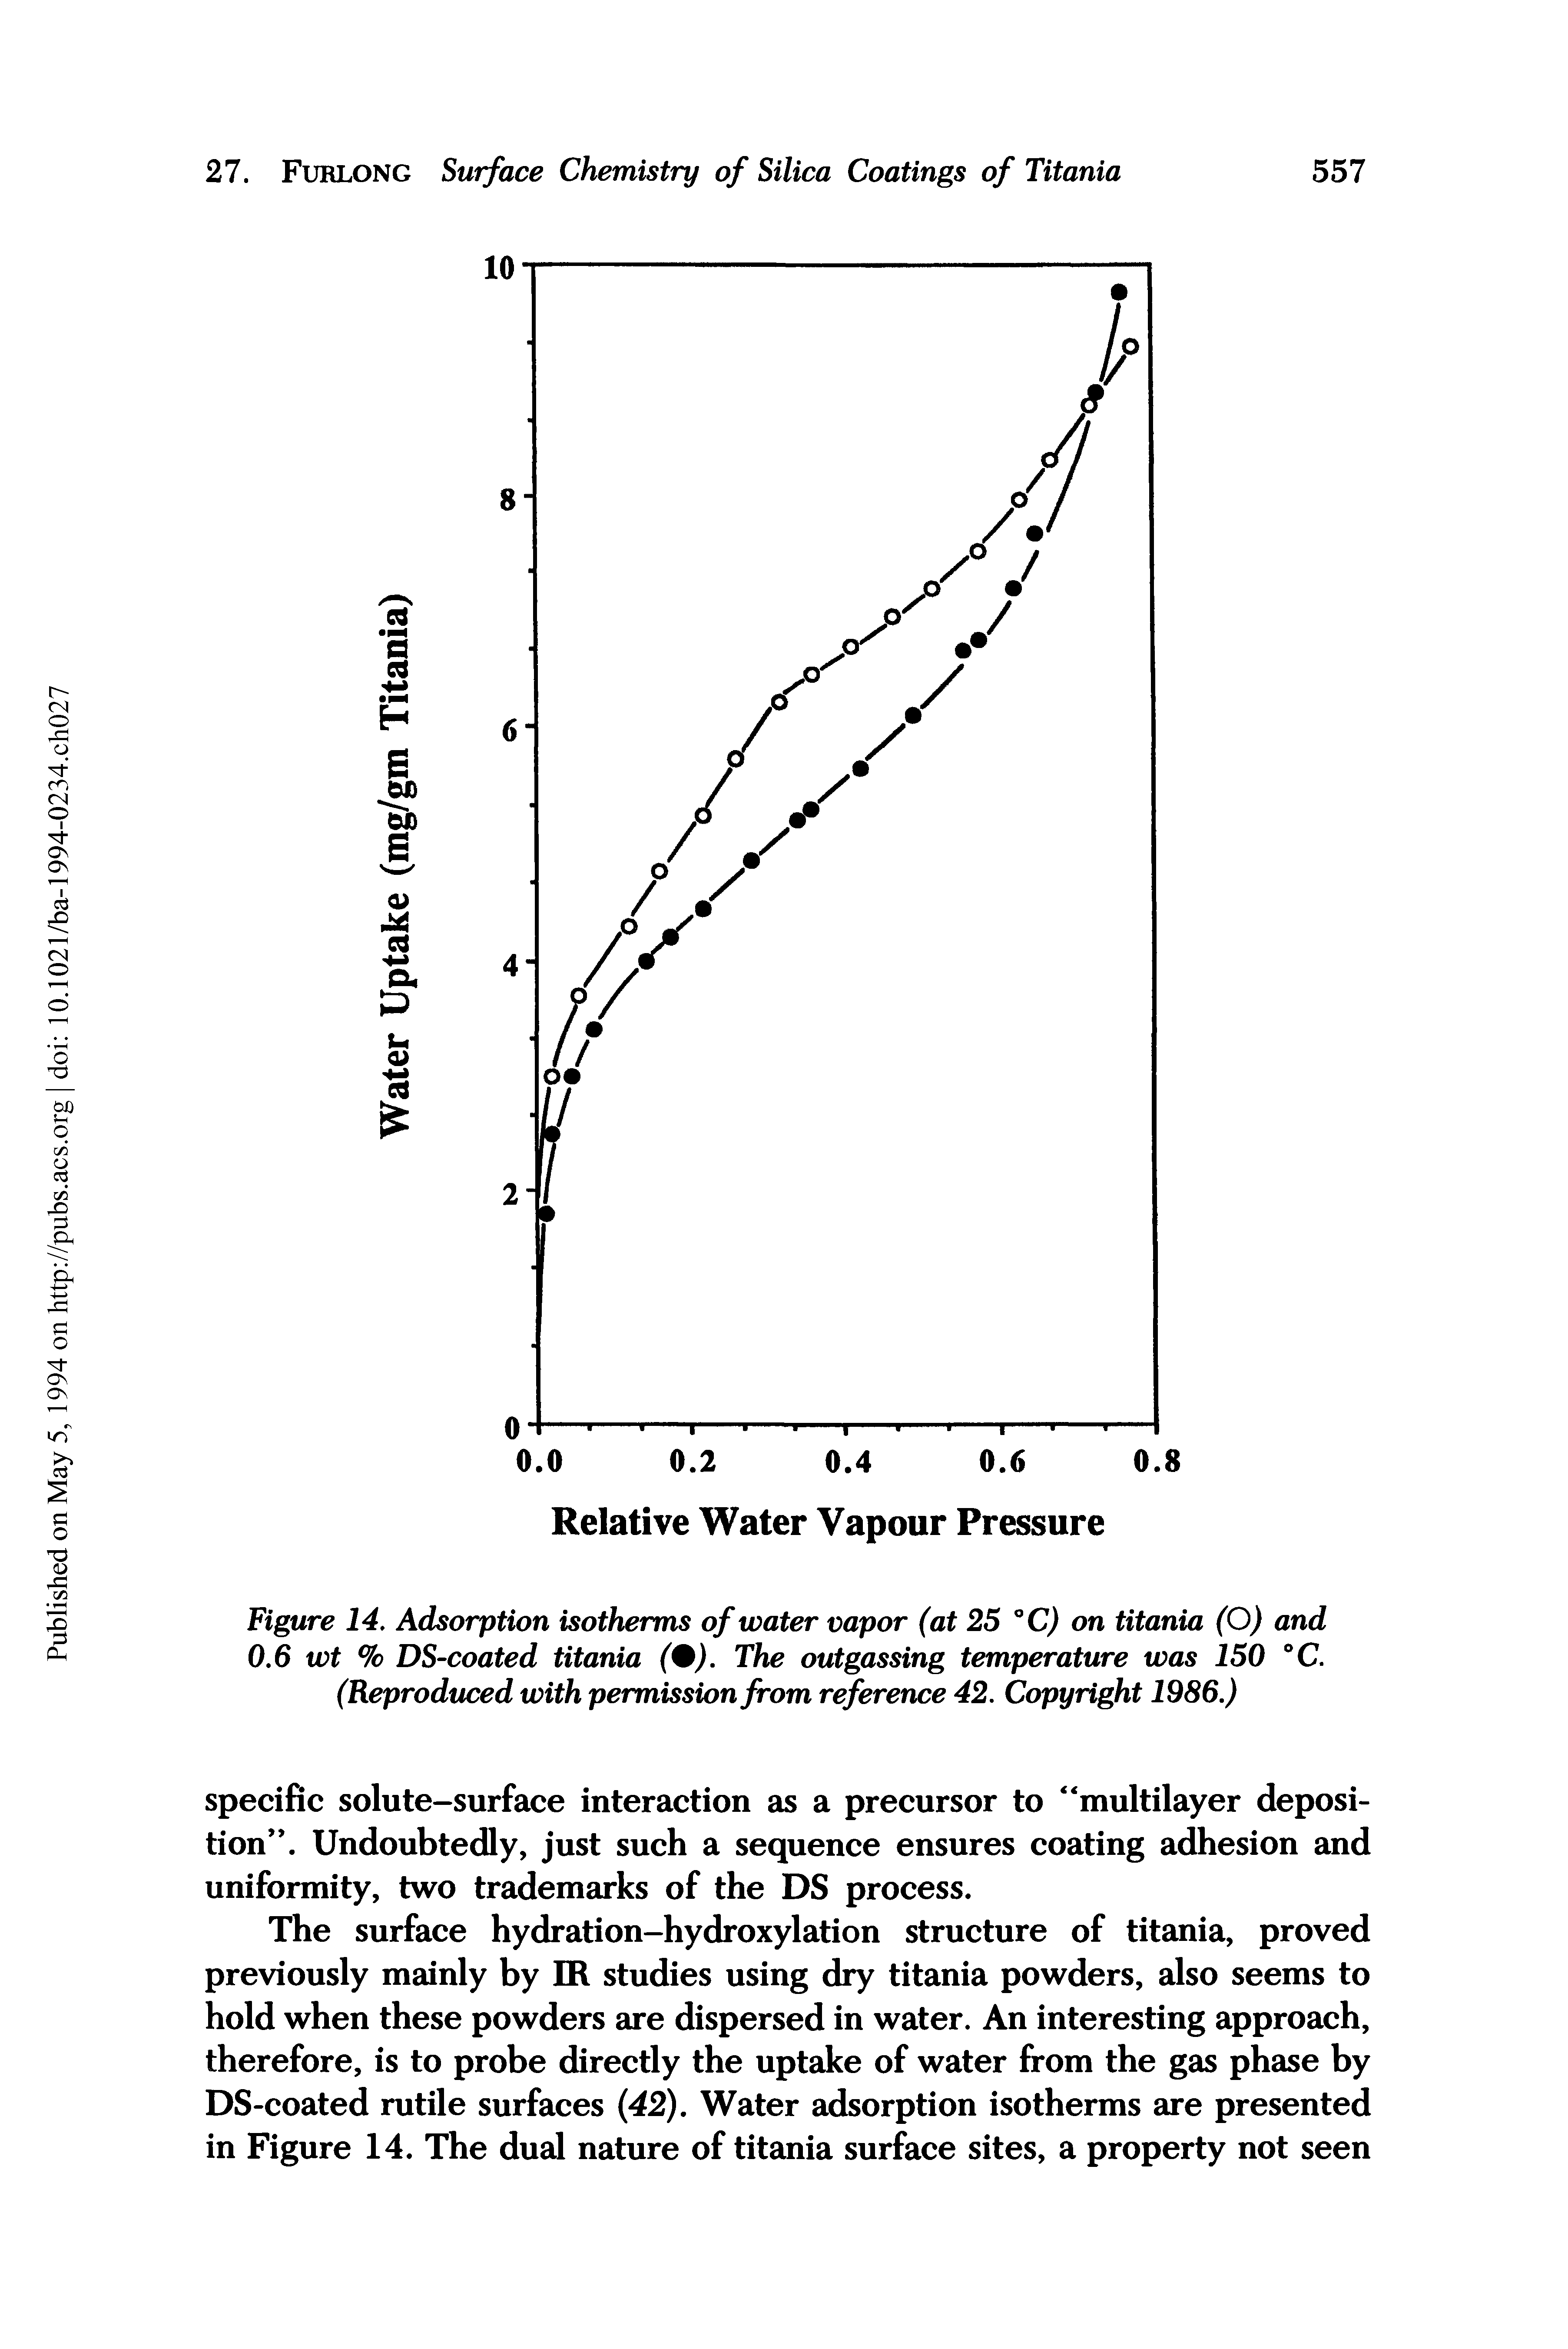 Figure 14. Adsorption isotherms of water vapor (at 25 °C) on titania (O) and 0.6 wt % DS-coated titania (%). The out gassing temperature was 150 °C. (Reproduced with permission from reference 42. Copyright 1986.)...